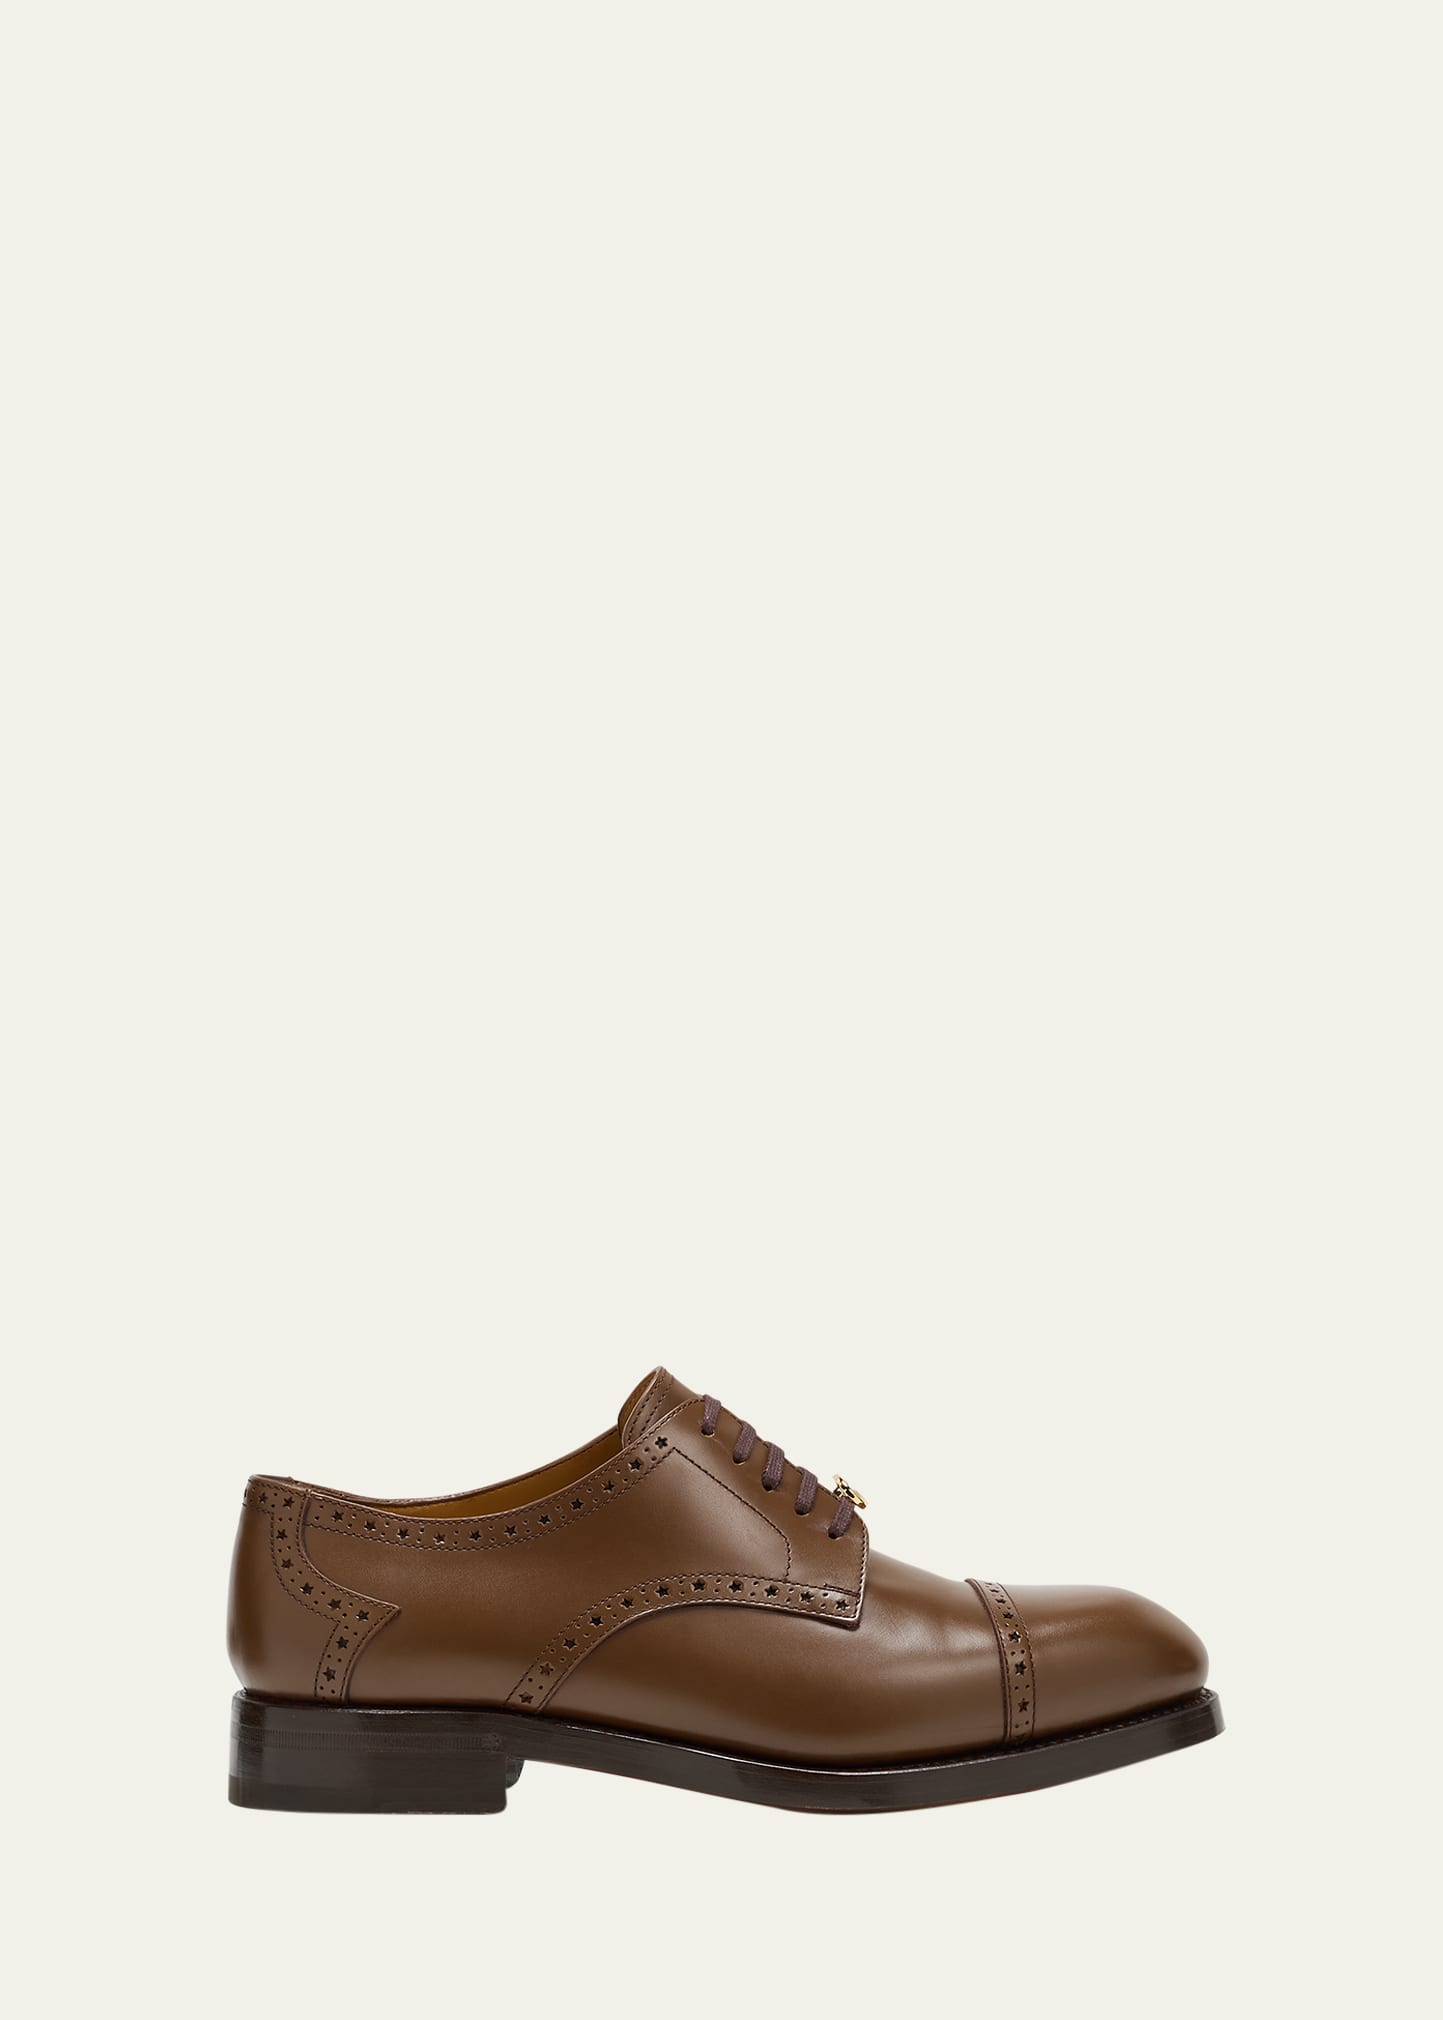 Gucci Zowir Perforated Leather Brogue Shoes In Brown Sugar